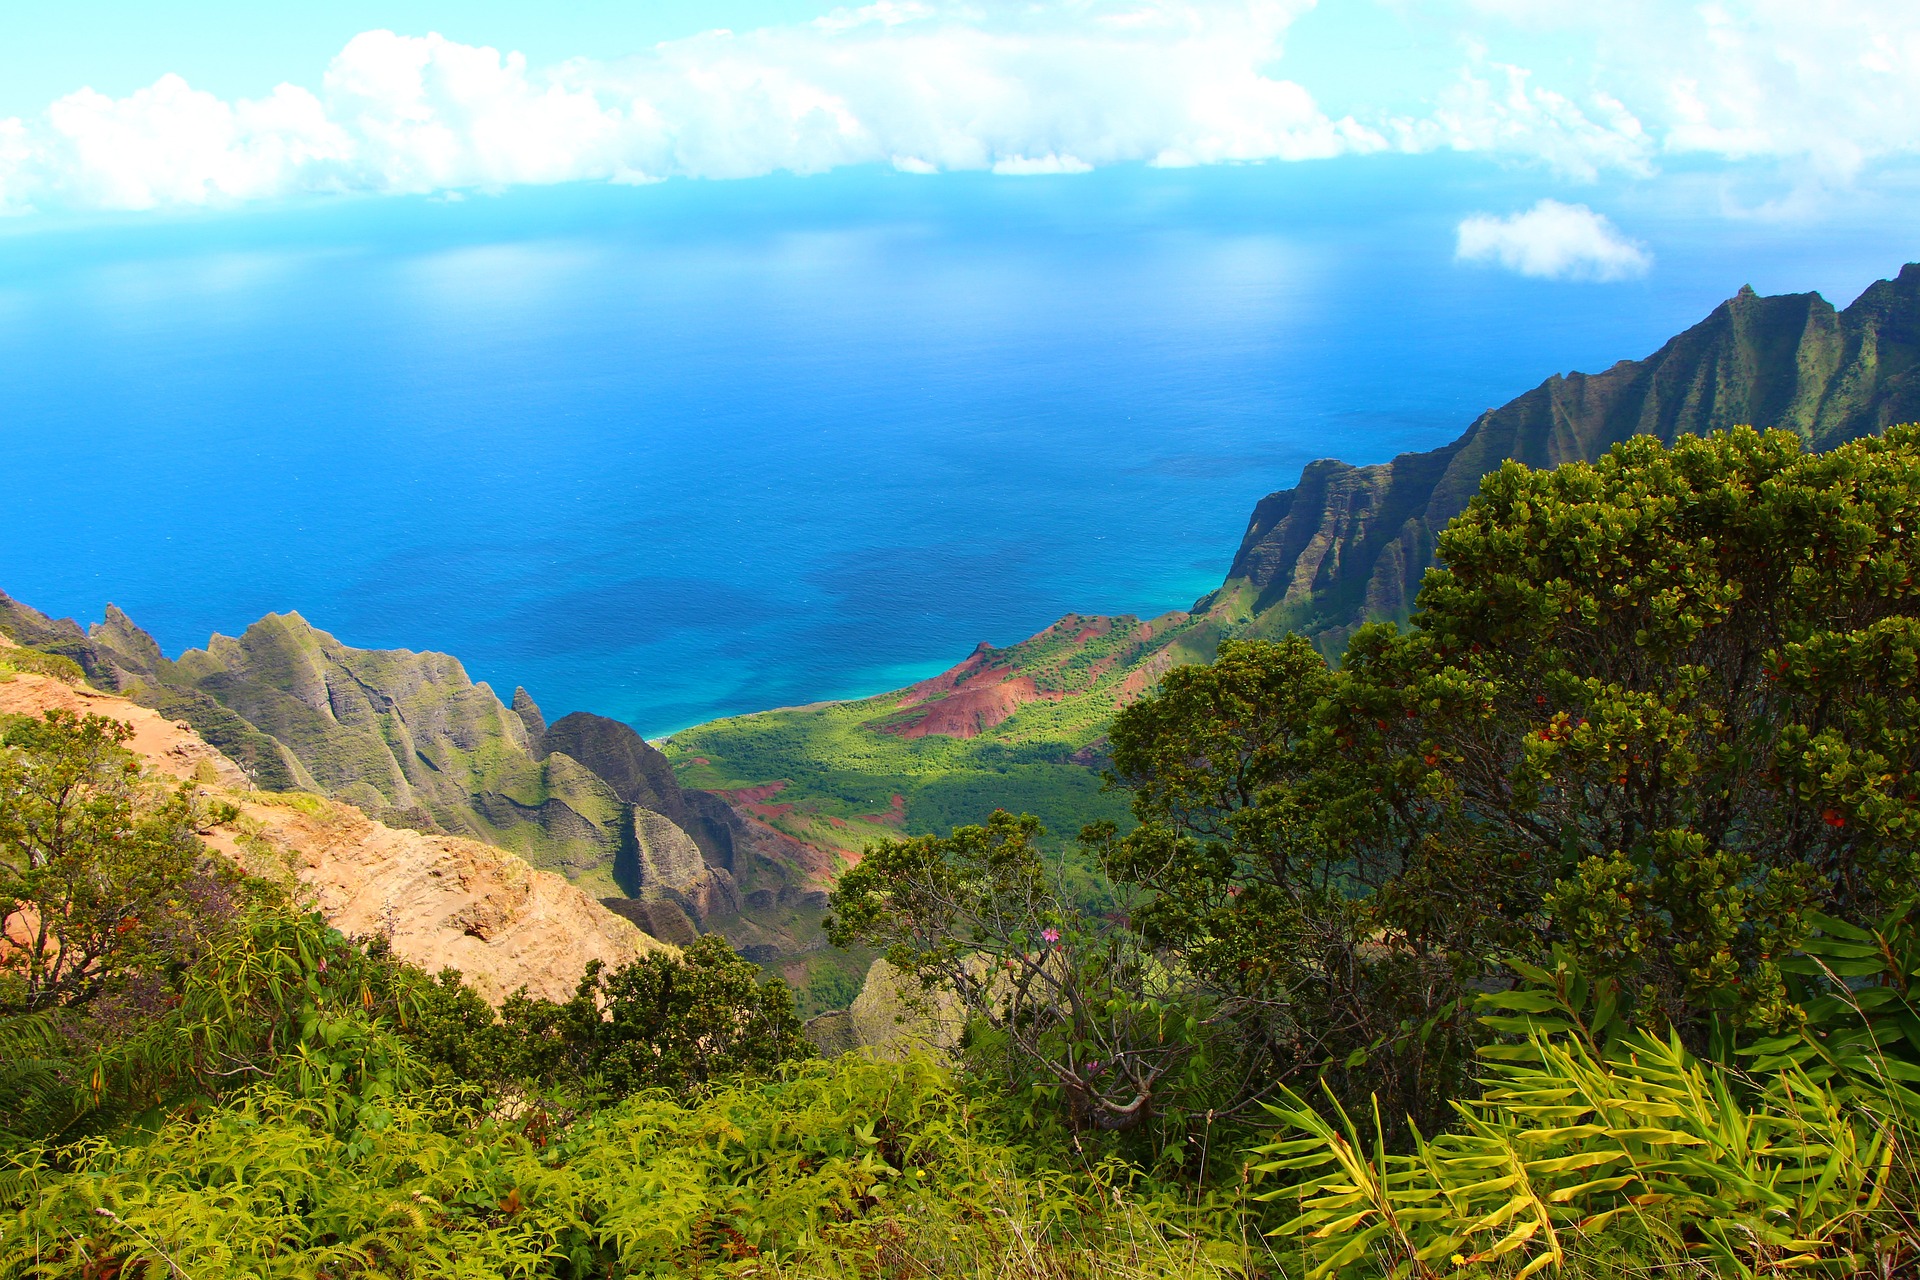 Make the most of your Kauai vacation with our local tips.